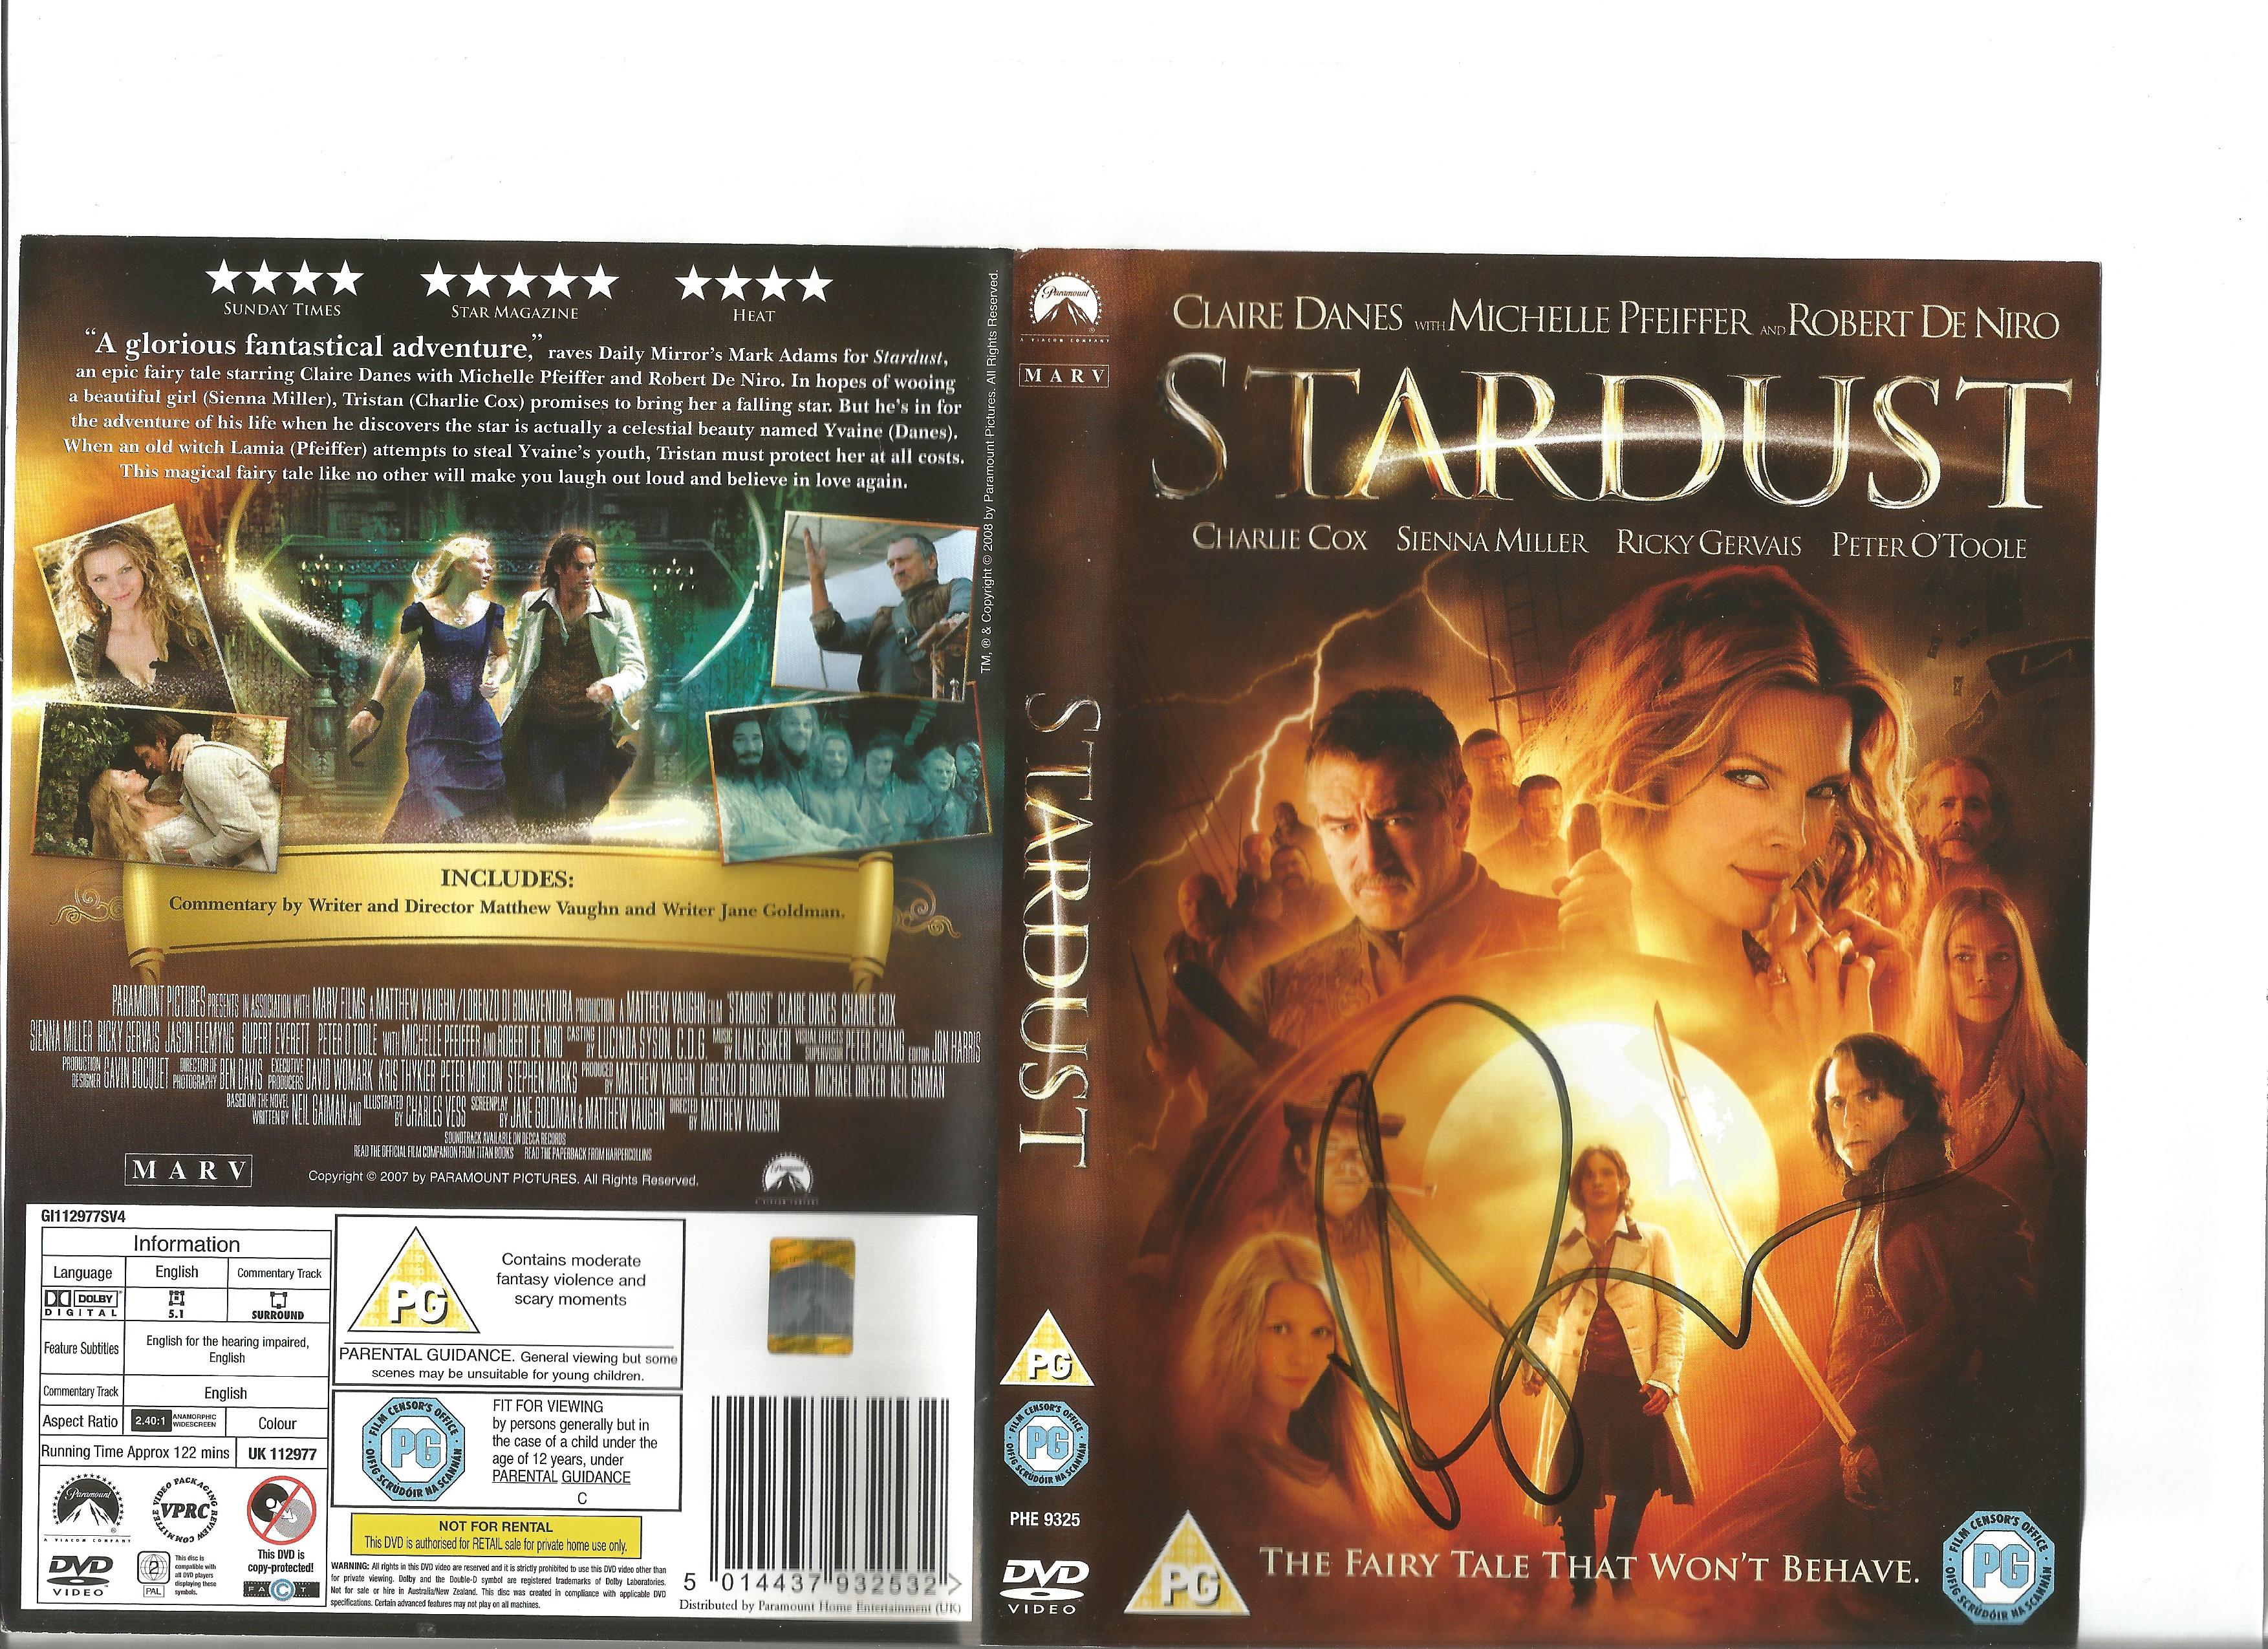 Ricky Gervais signed DVD sleeve for Stardust. DVD included. Good Condition. All autographs are